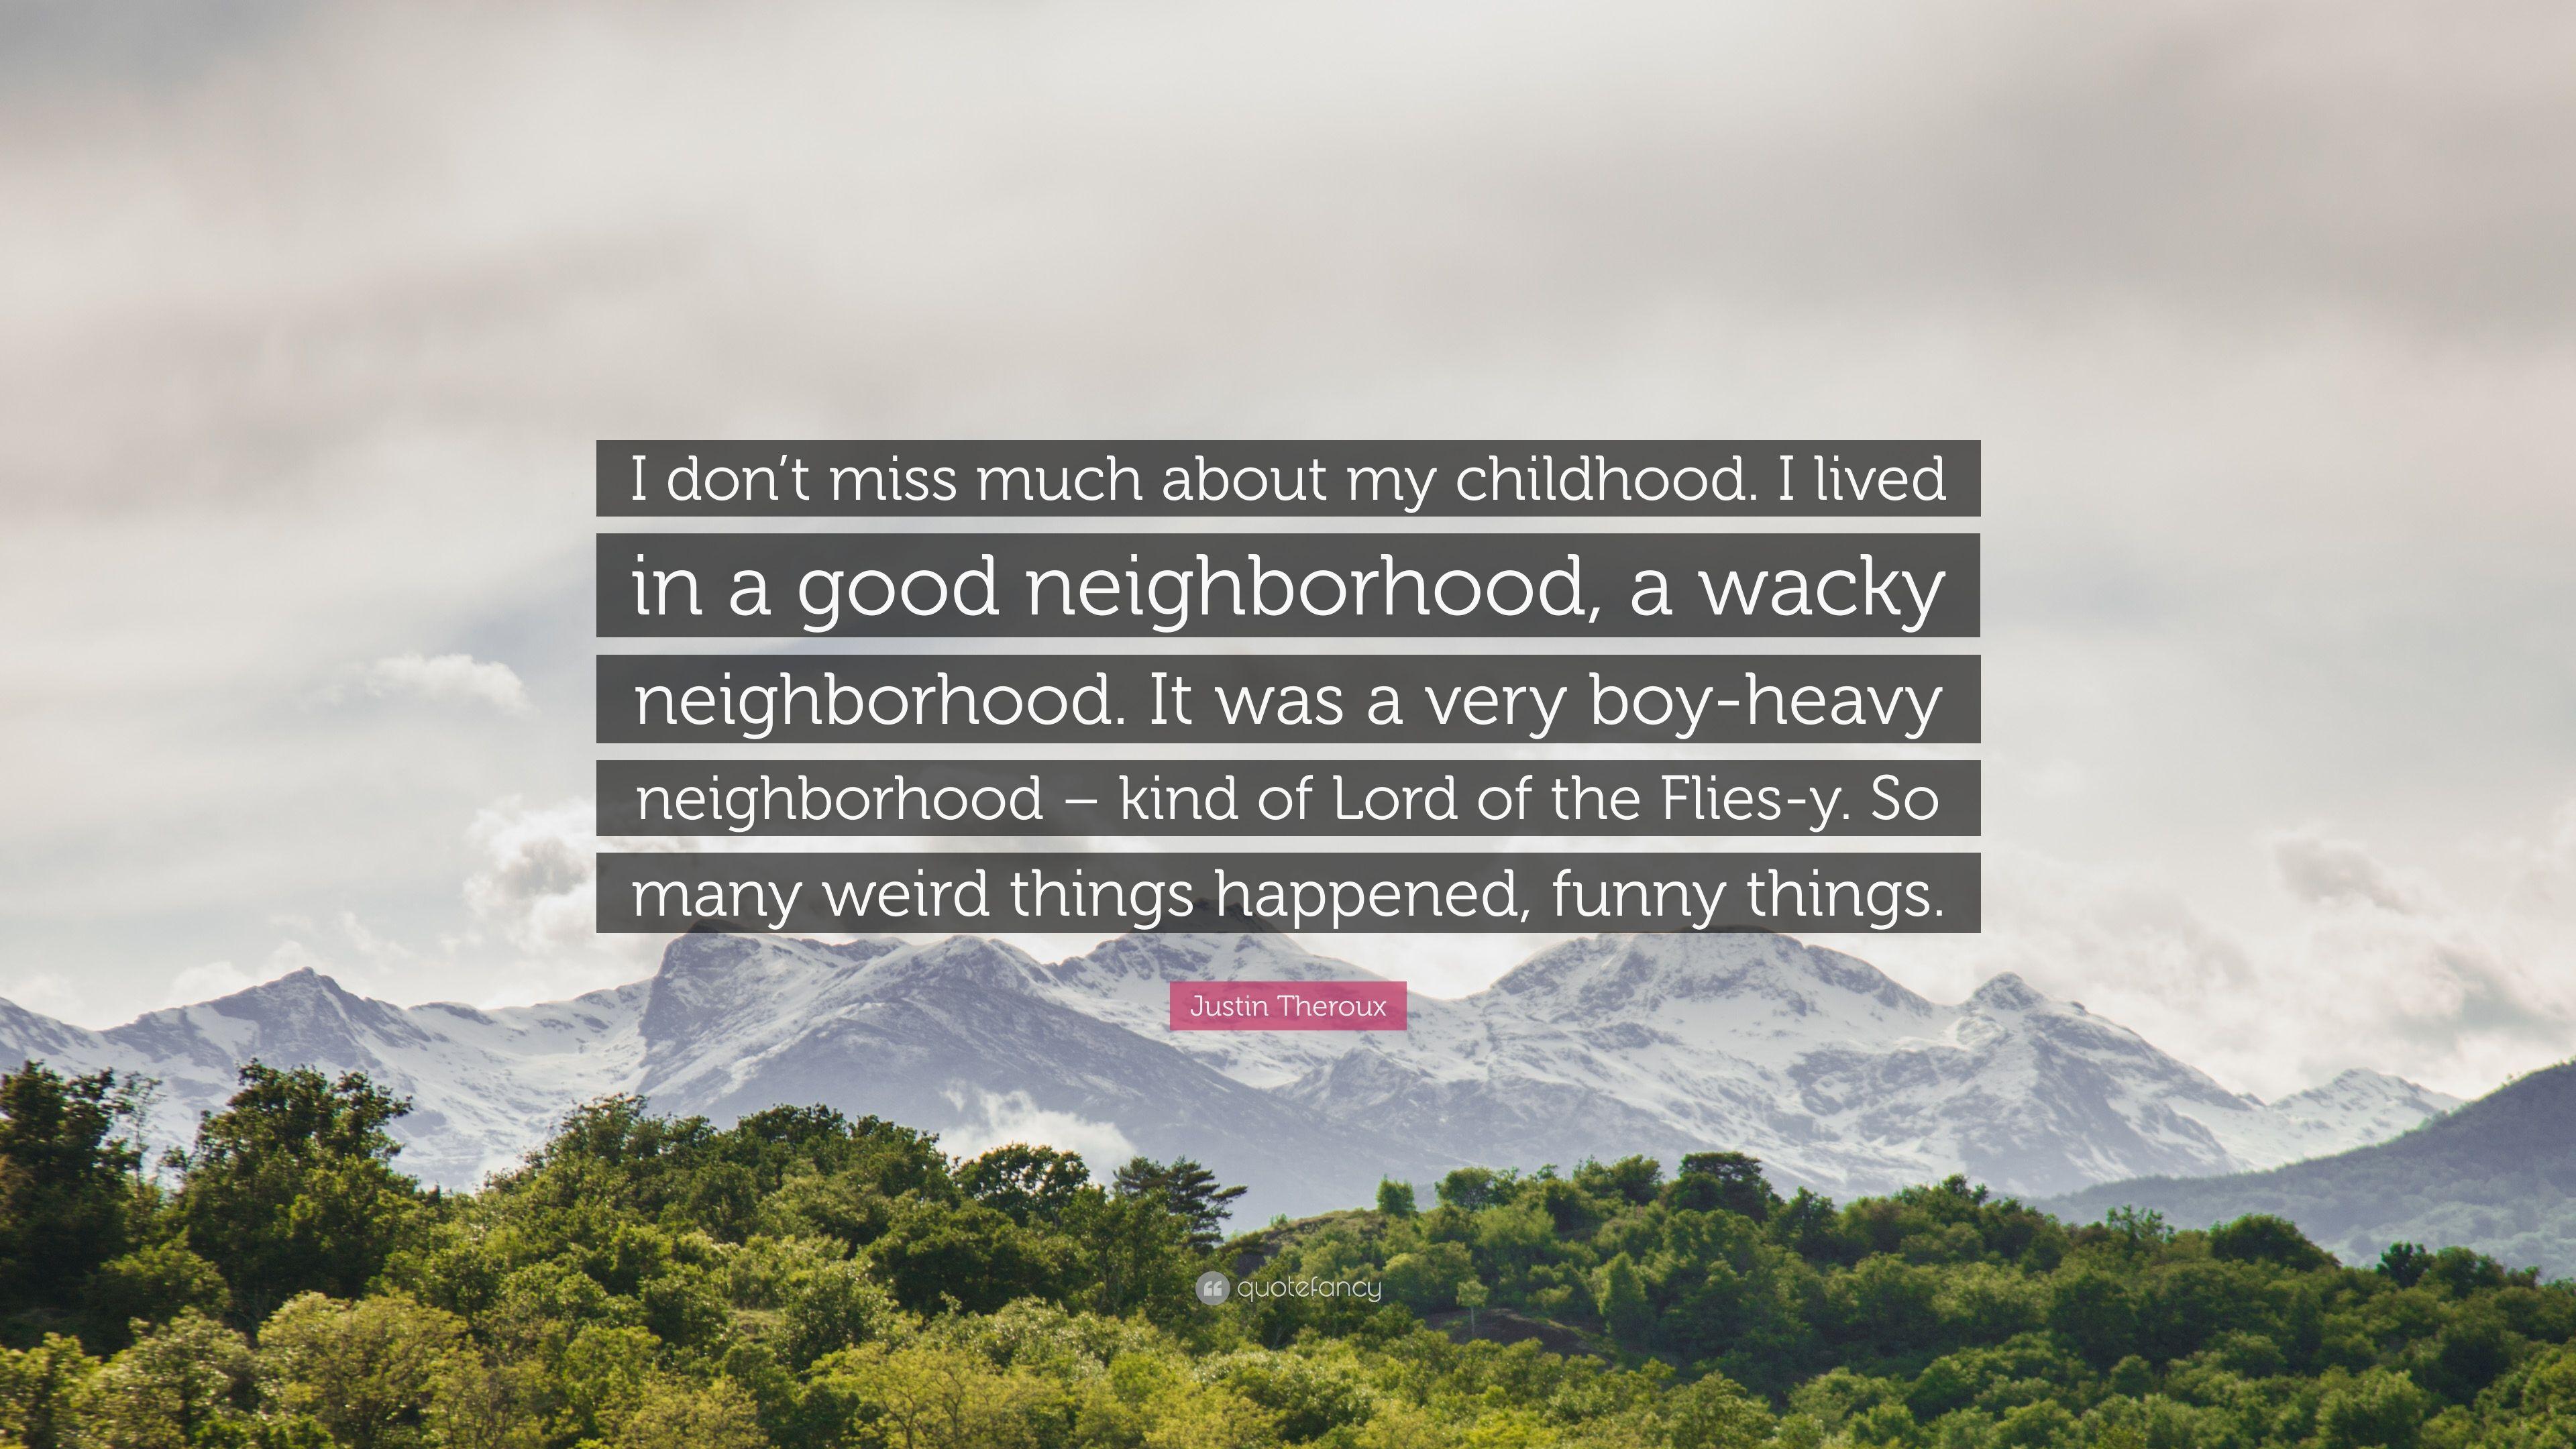 Justin Theroux Quote: “I don't miss much about my childhood. I